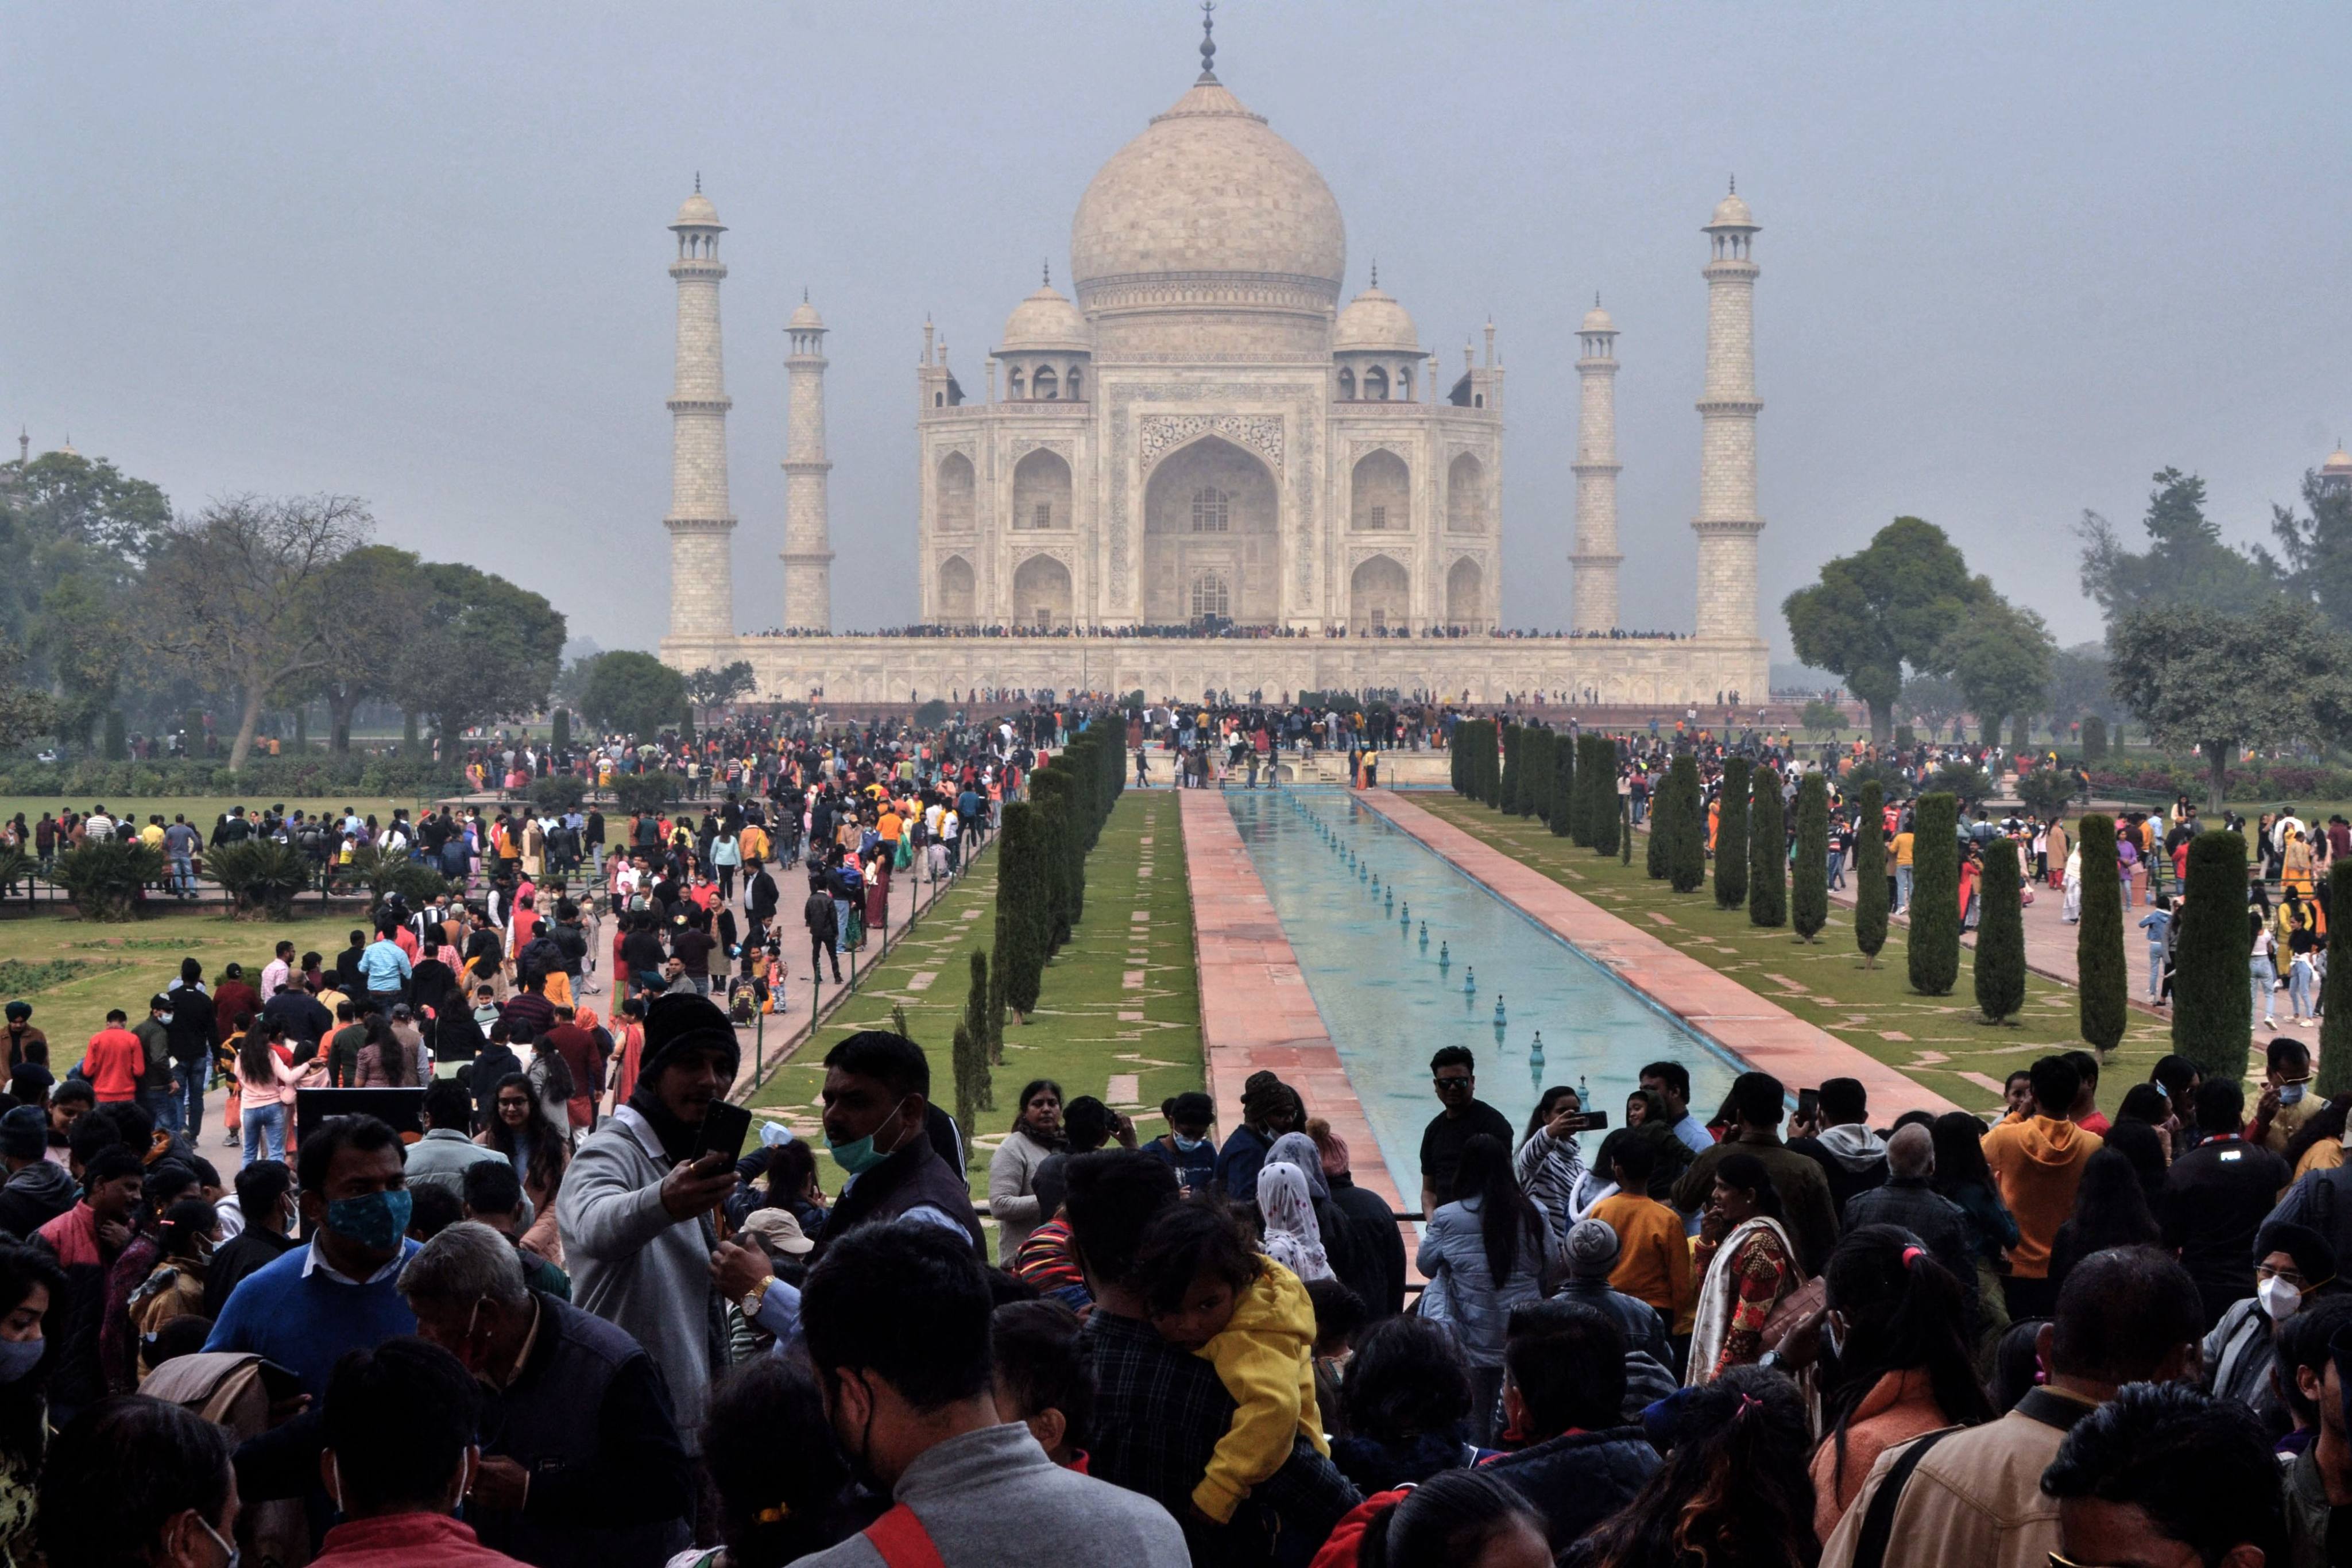 Crowds gather to visit the Taj Mahal in Agra in December. Photo: AFP